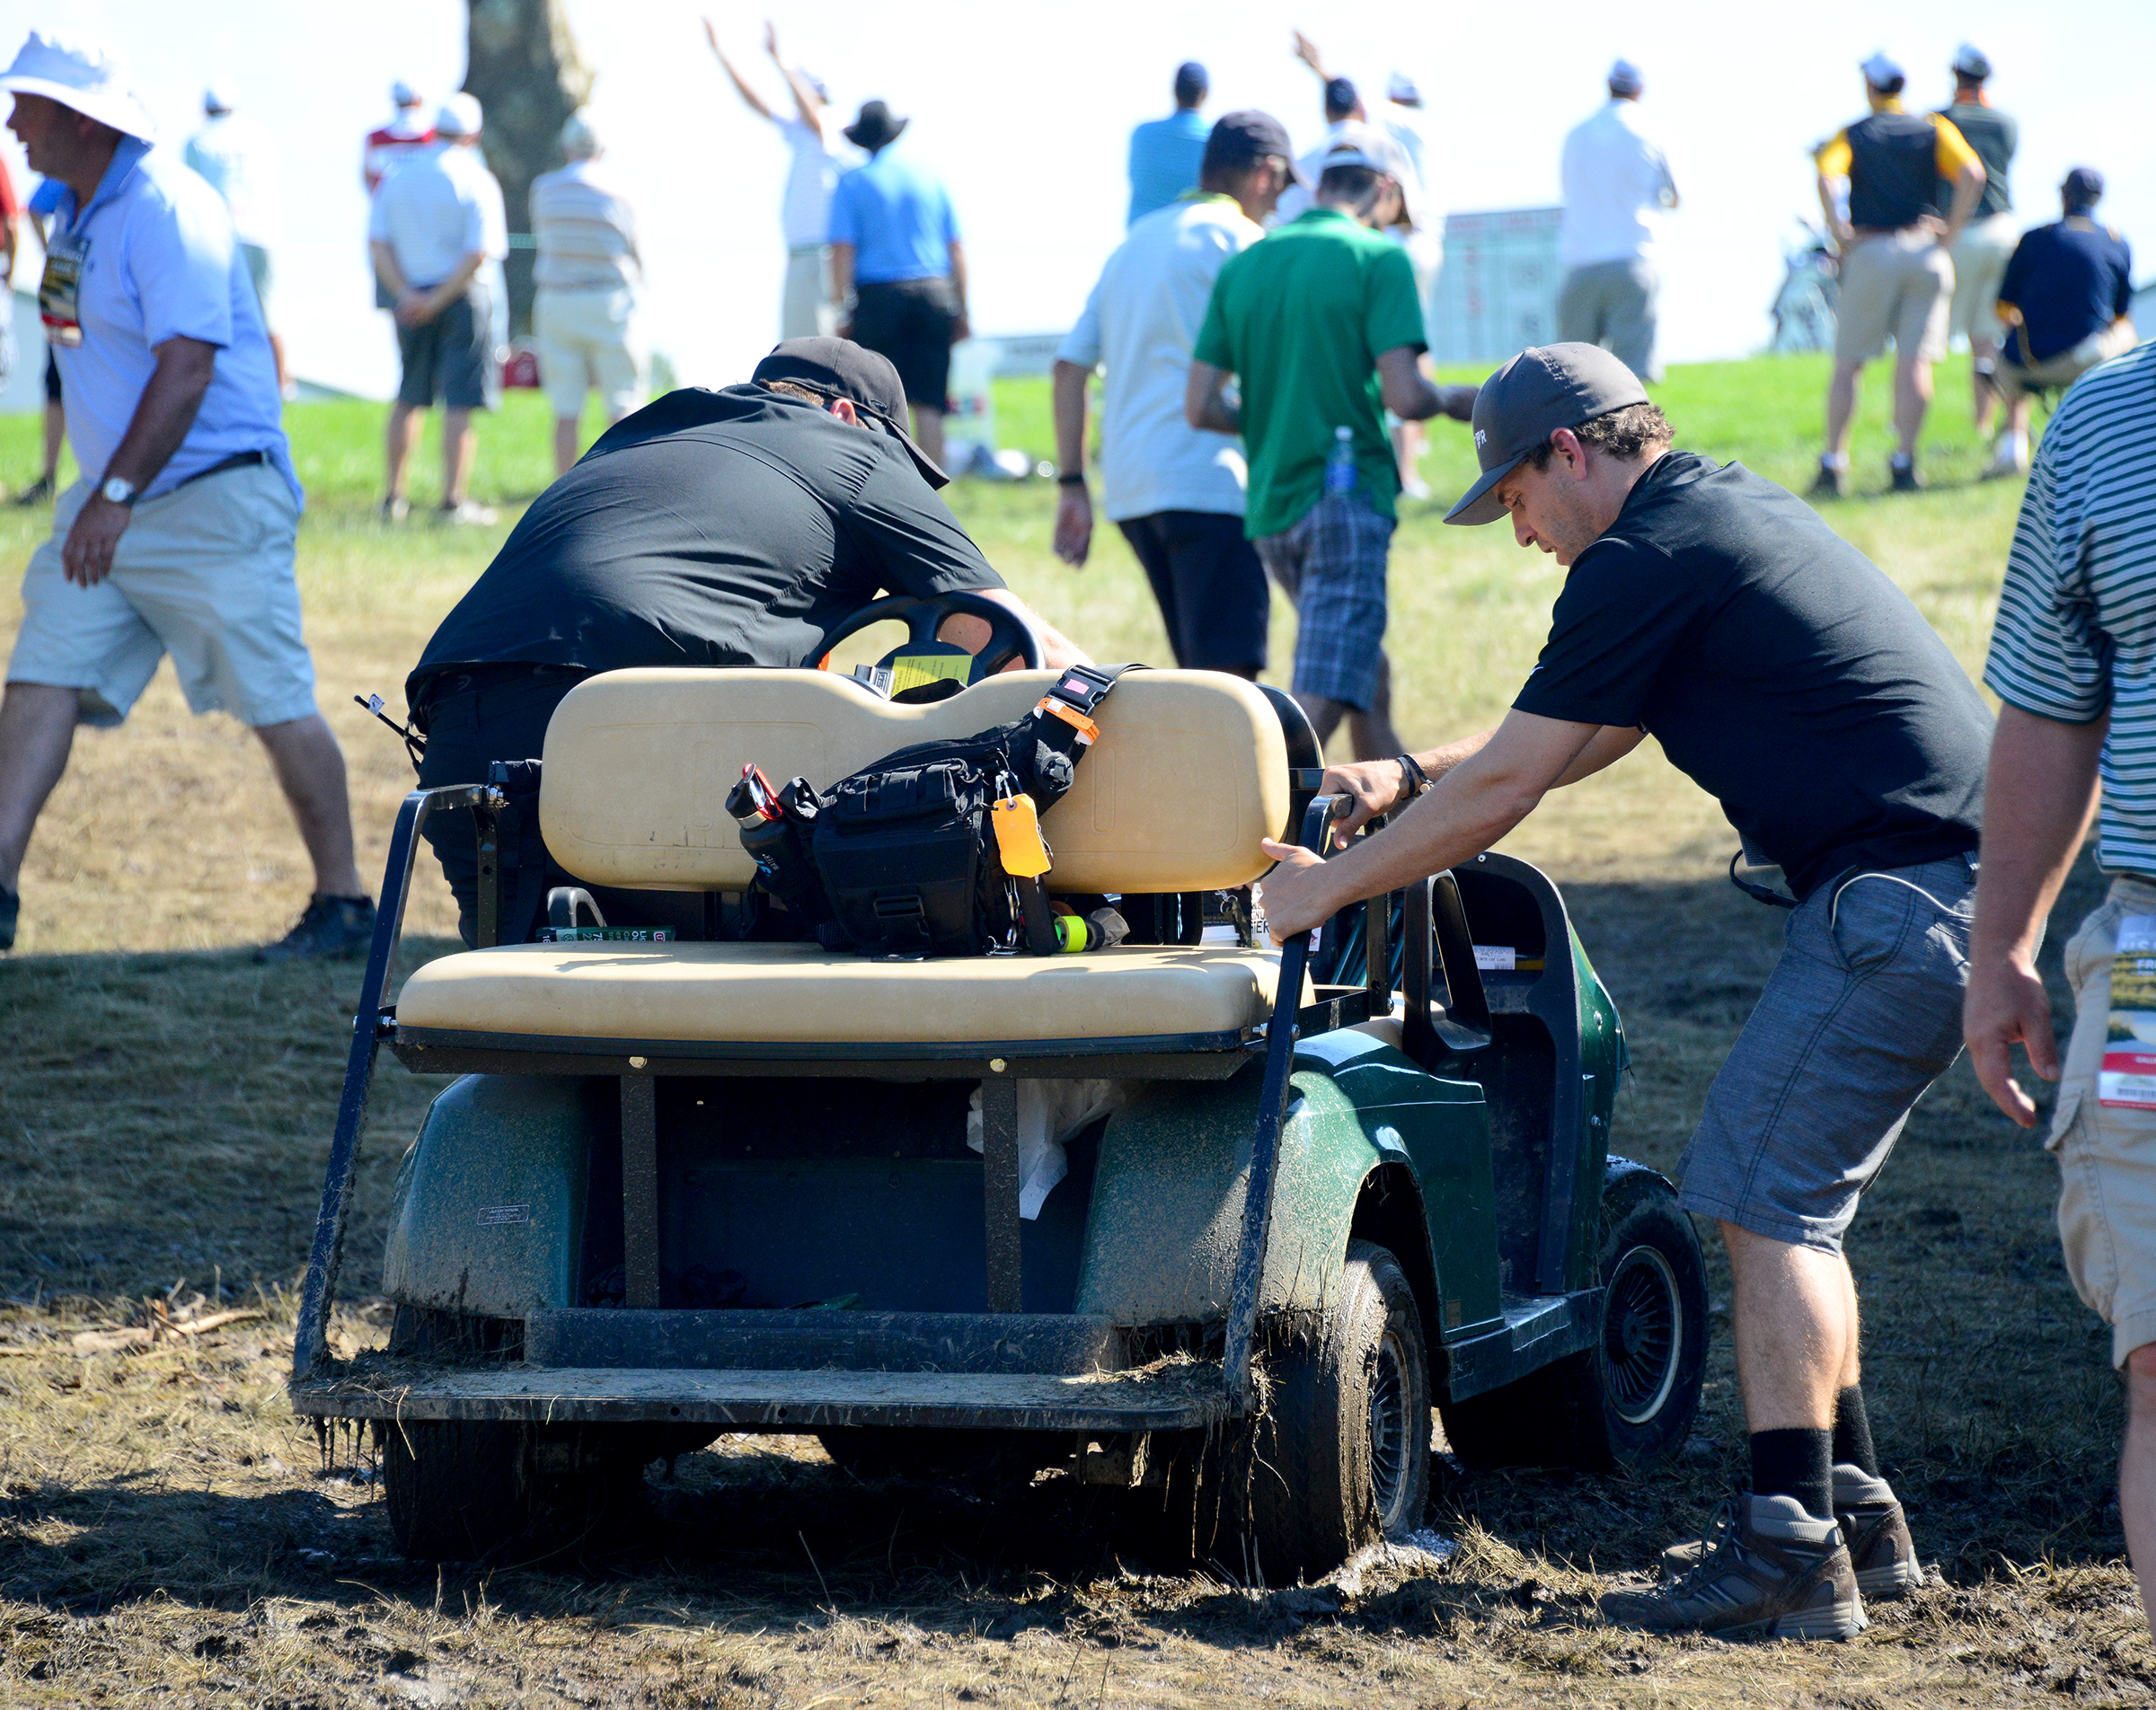 Grounds crew members try to free a cart from the mud Friday ay Oakmont Country Club. (Lake Fong/Post-Gazette)